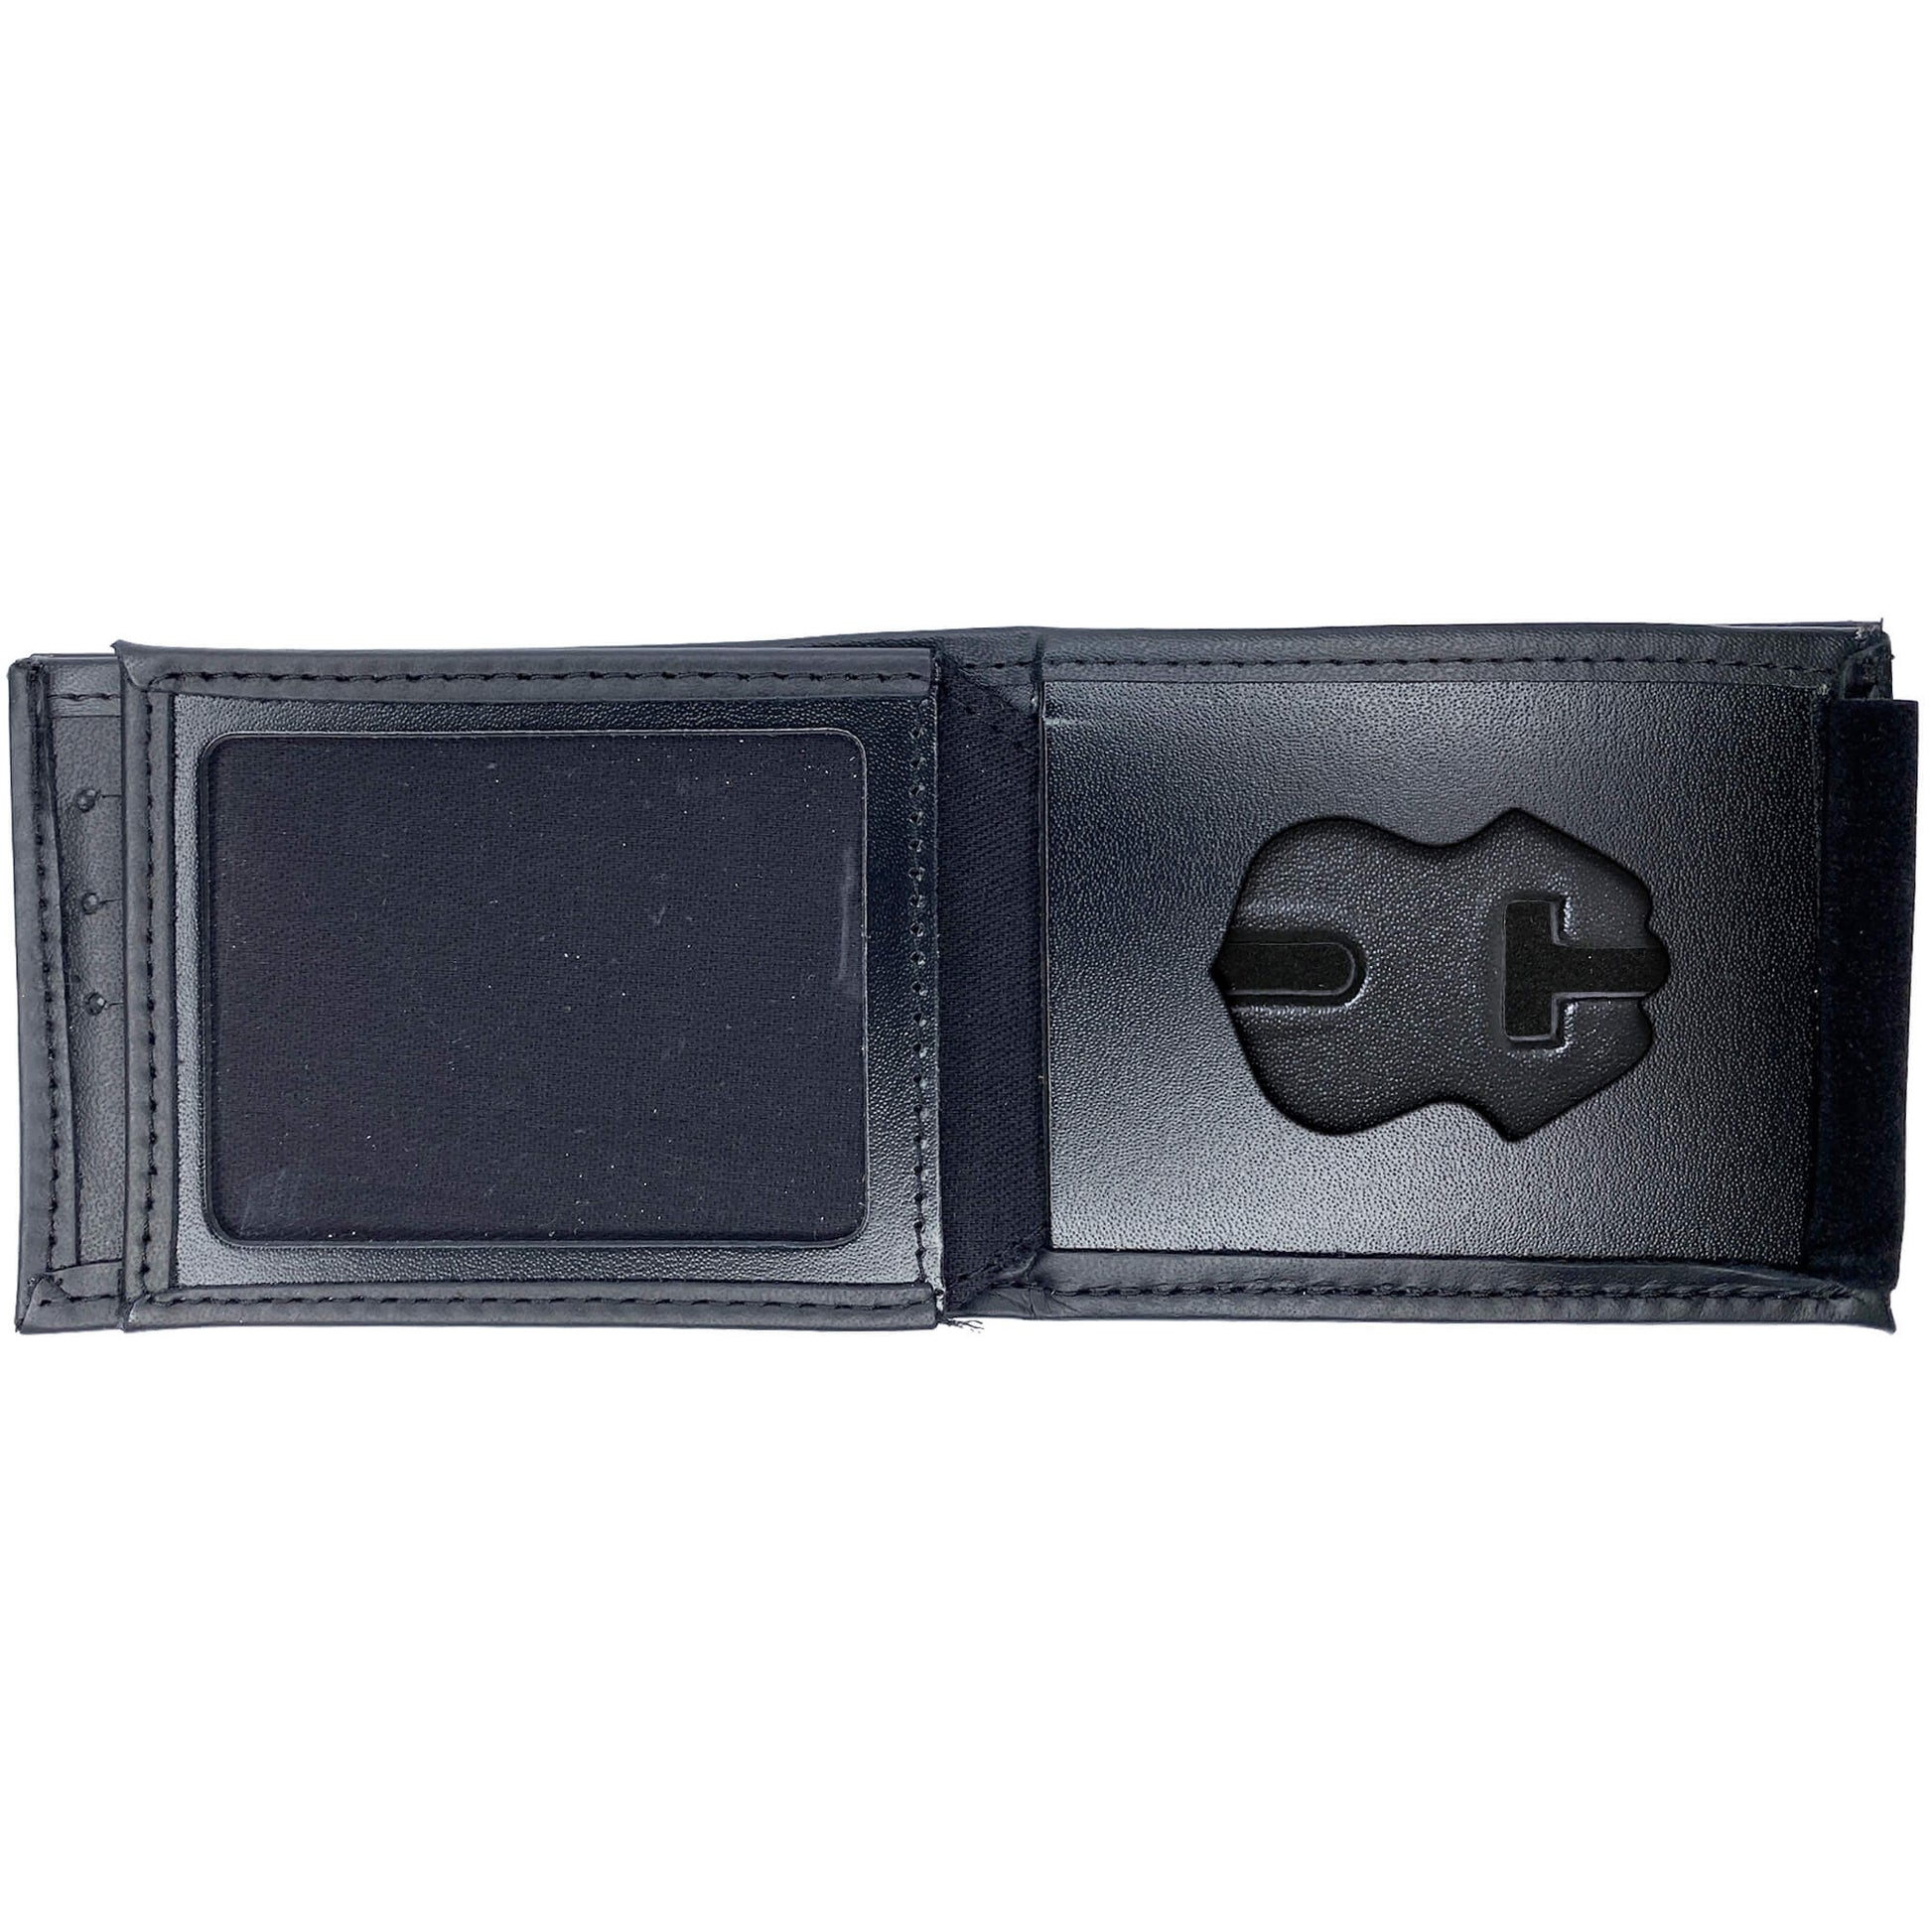 Perfect Fit Bi Fold Wallet with Credit Card Slots and ID Window